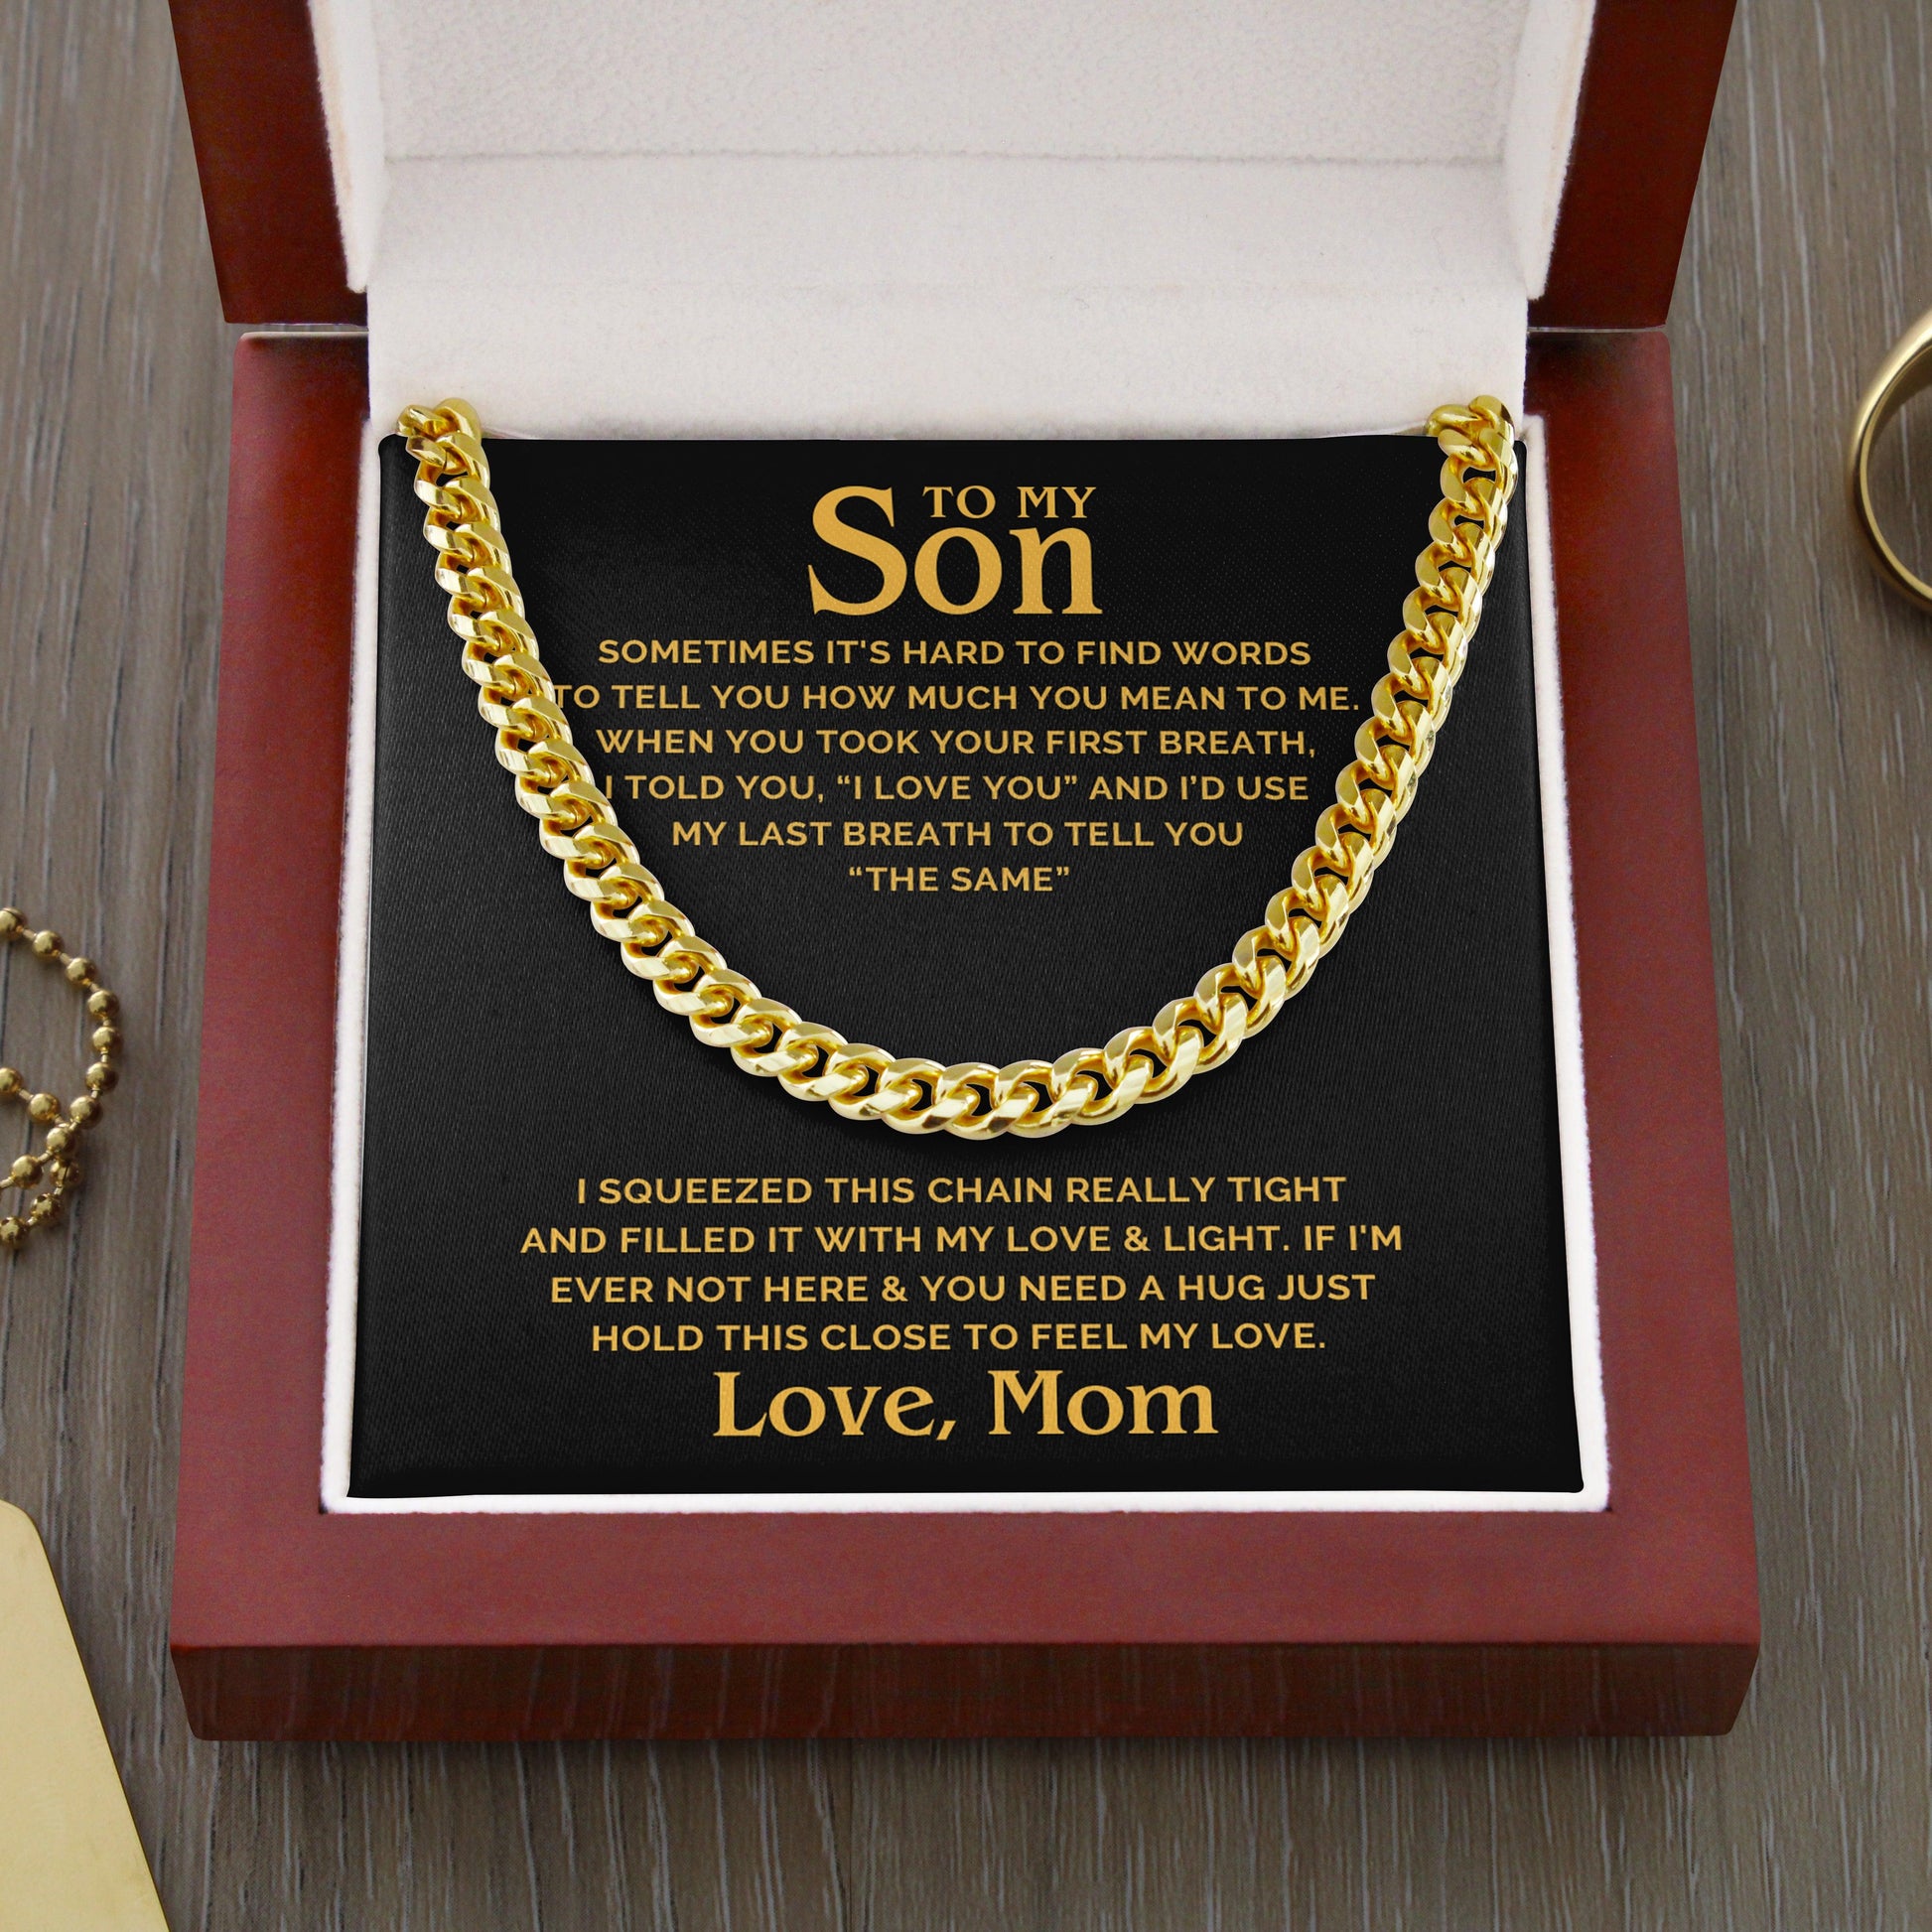 Jewelry gifts Son - Hug & Hold - Cuban Link Chain - Belesmé - Memorable Jewelry Gifts